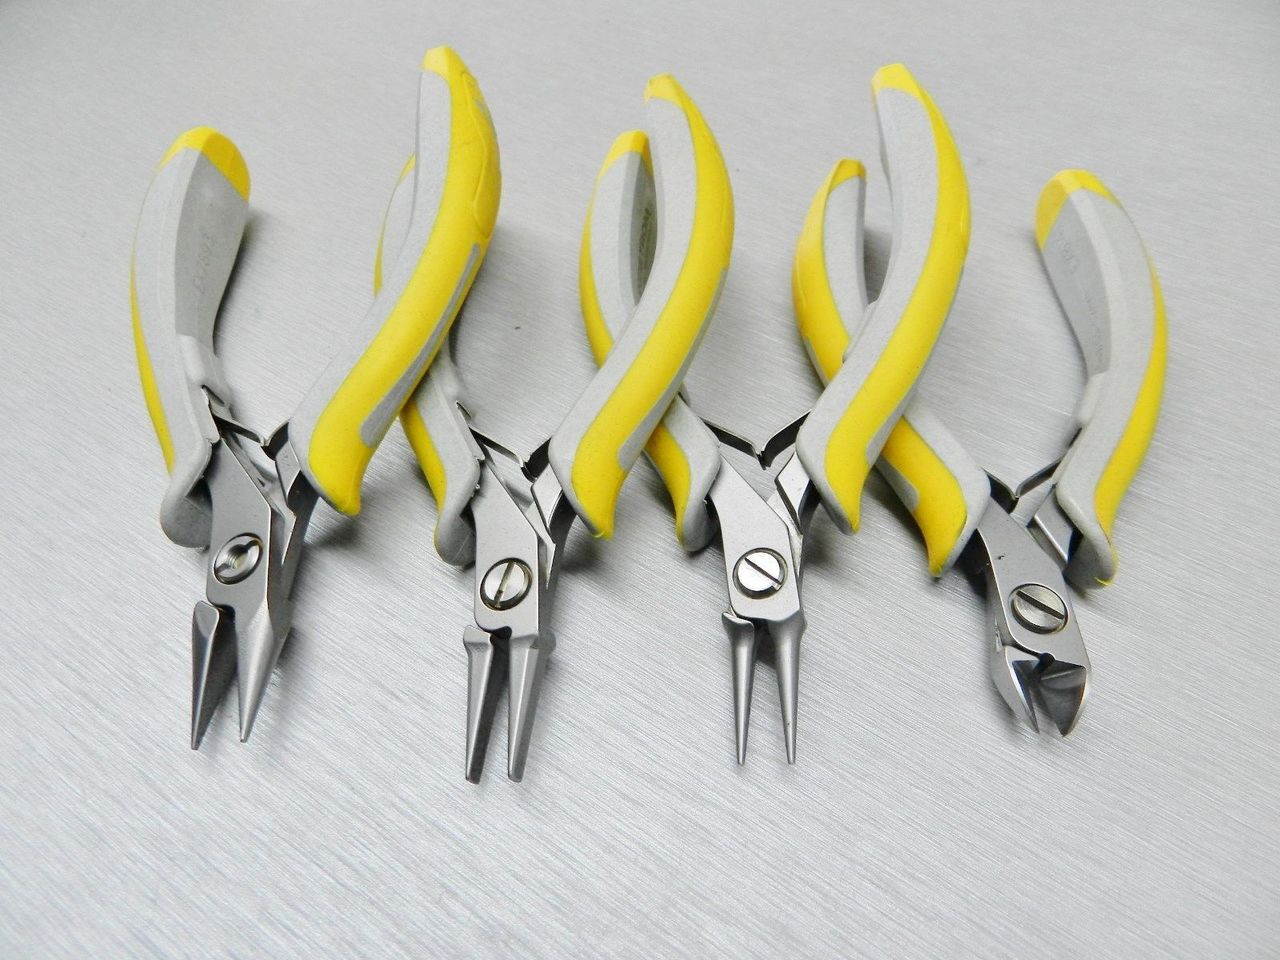 Nylon Jaw Coiling Pliers, Round and Flat Jaw, 5-1/2 Inches PLR